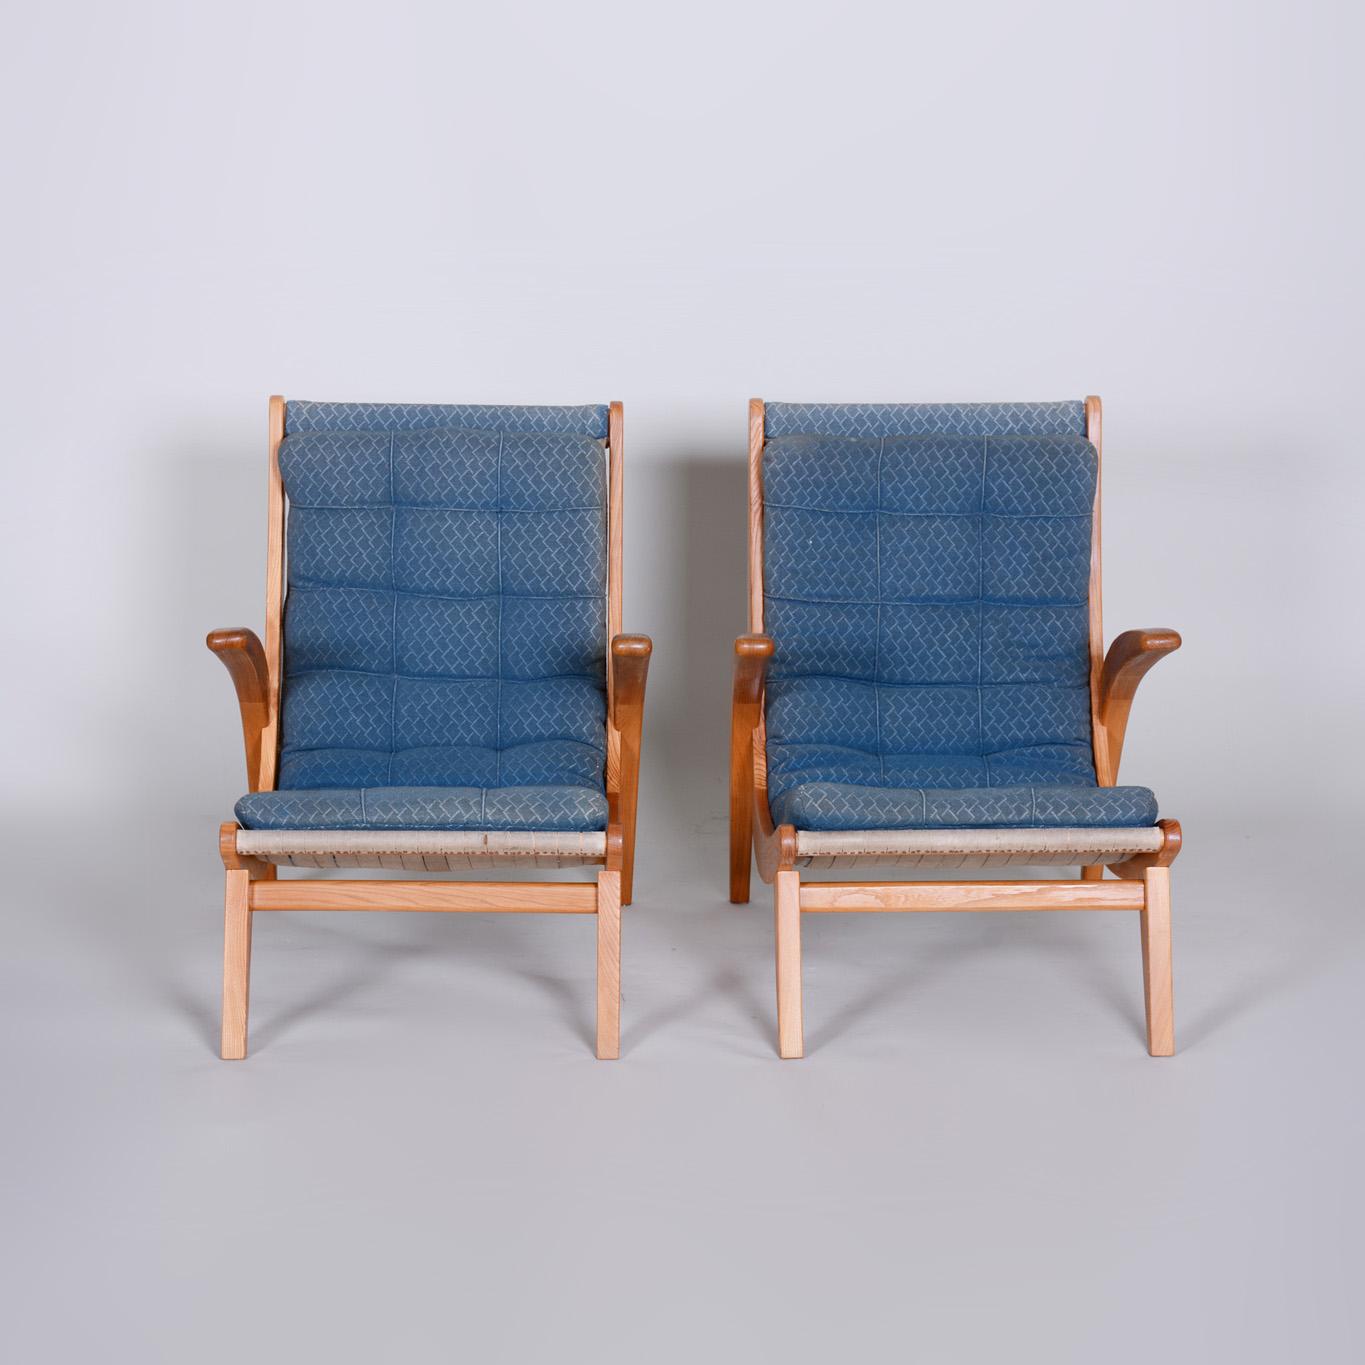 Pair of Blue Mid Century Armchairs, Designed by Jan Vaněk in the 1950s, Ash In Good Condition For Sale In Horomerice, CZ